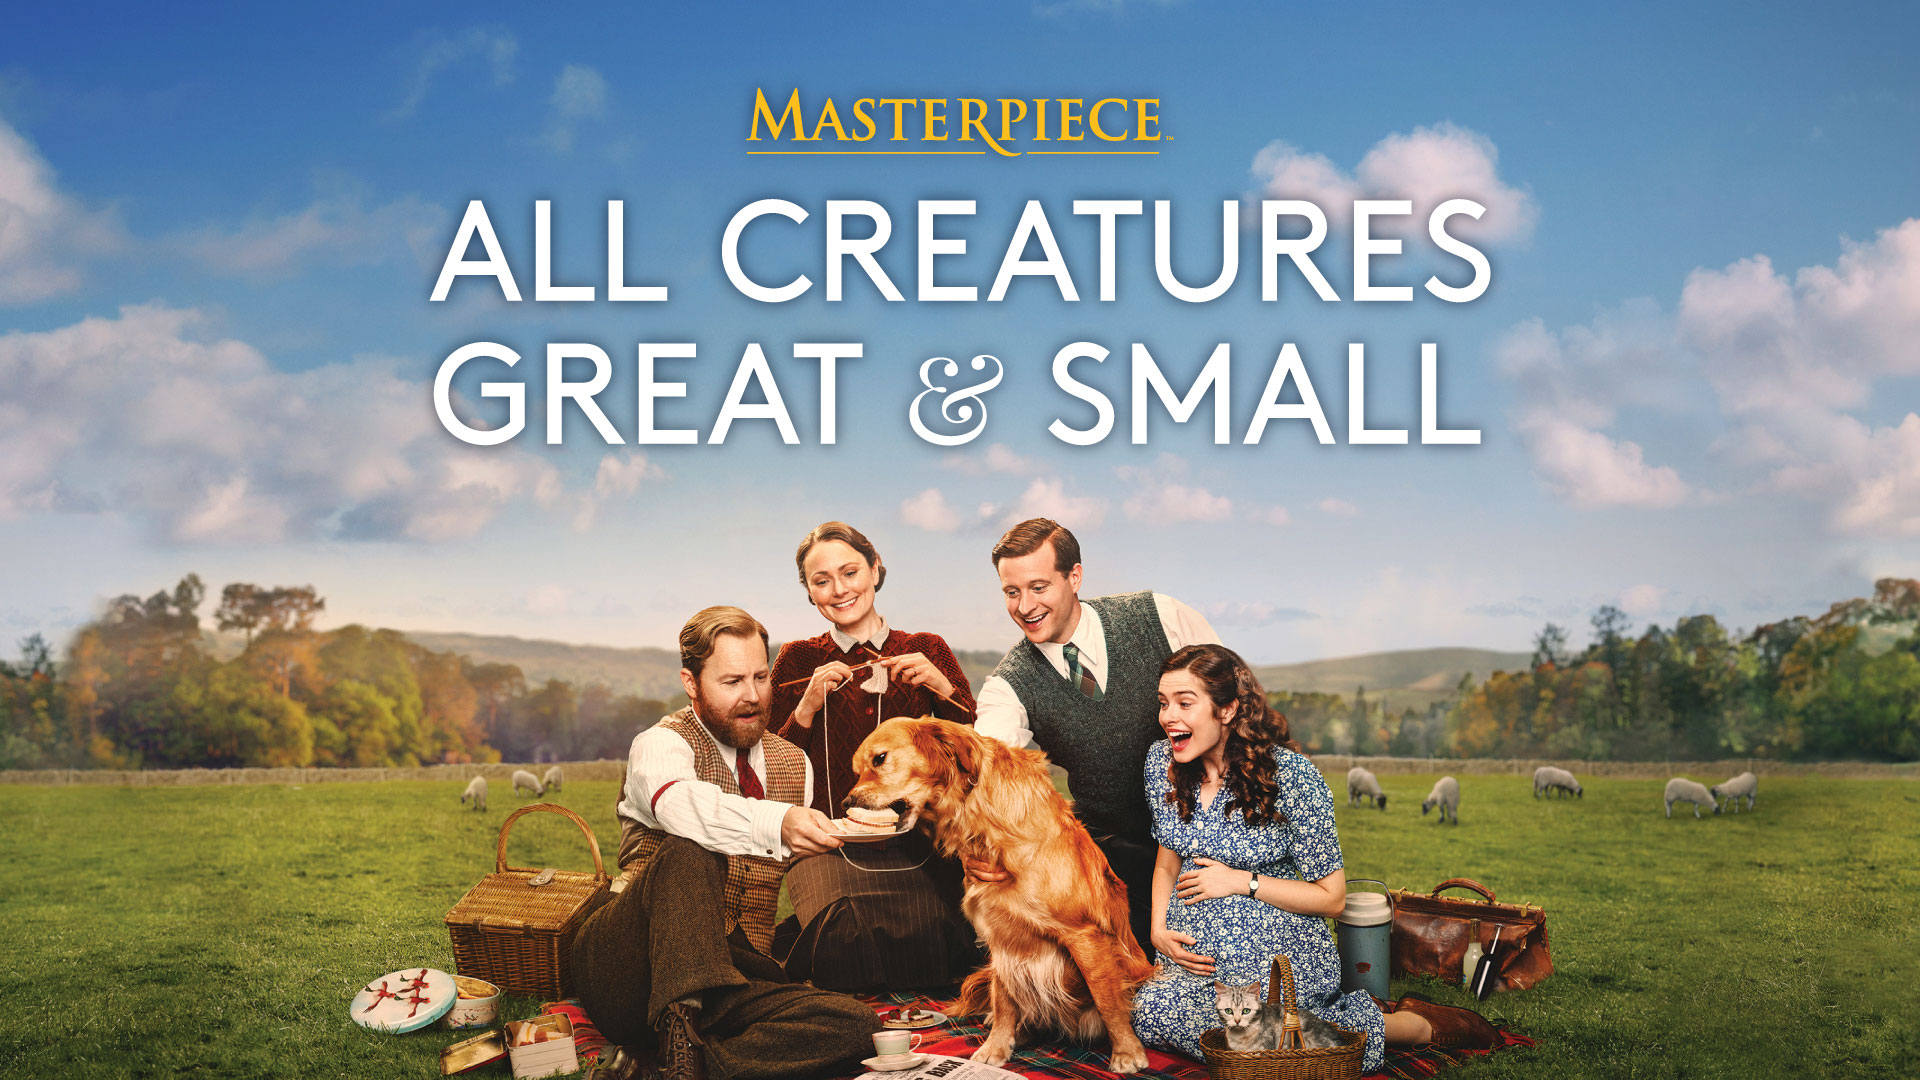 MASTERPIECE: All Creatures Great & Small